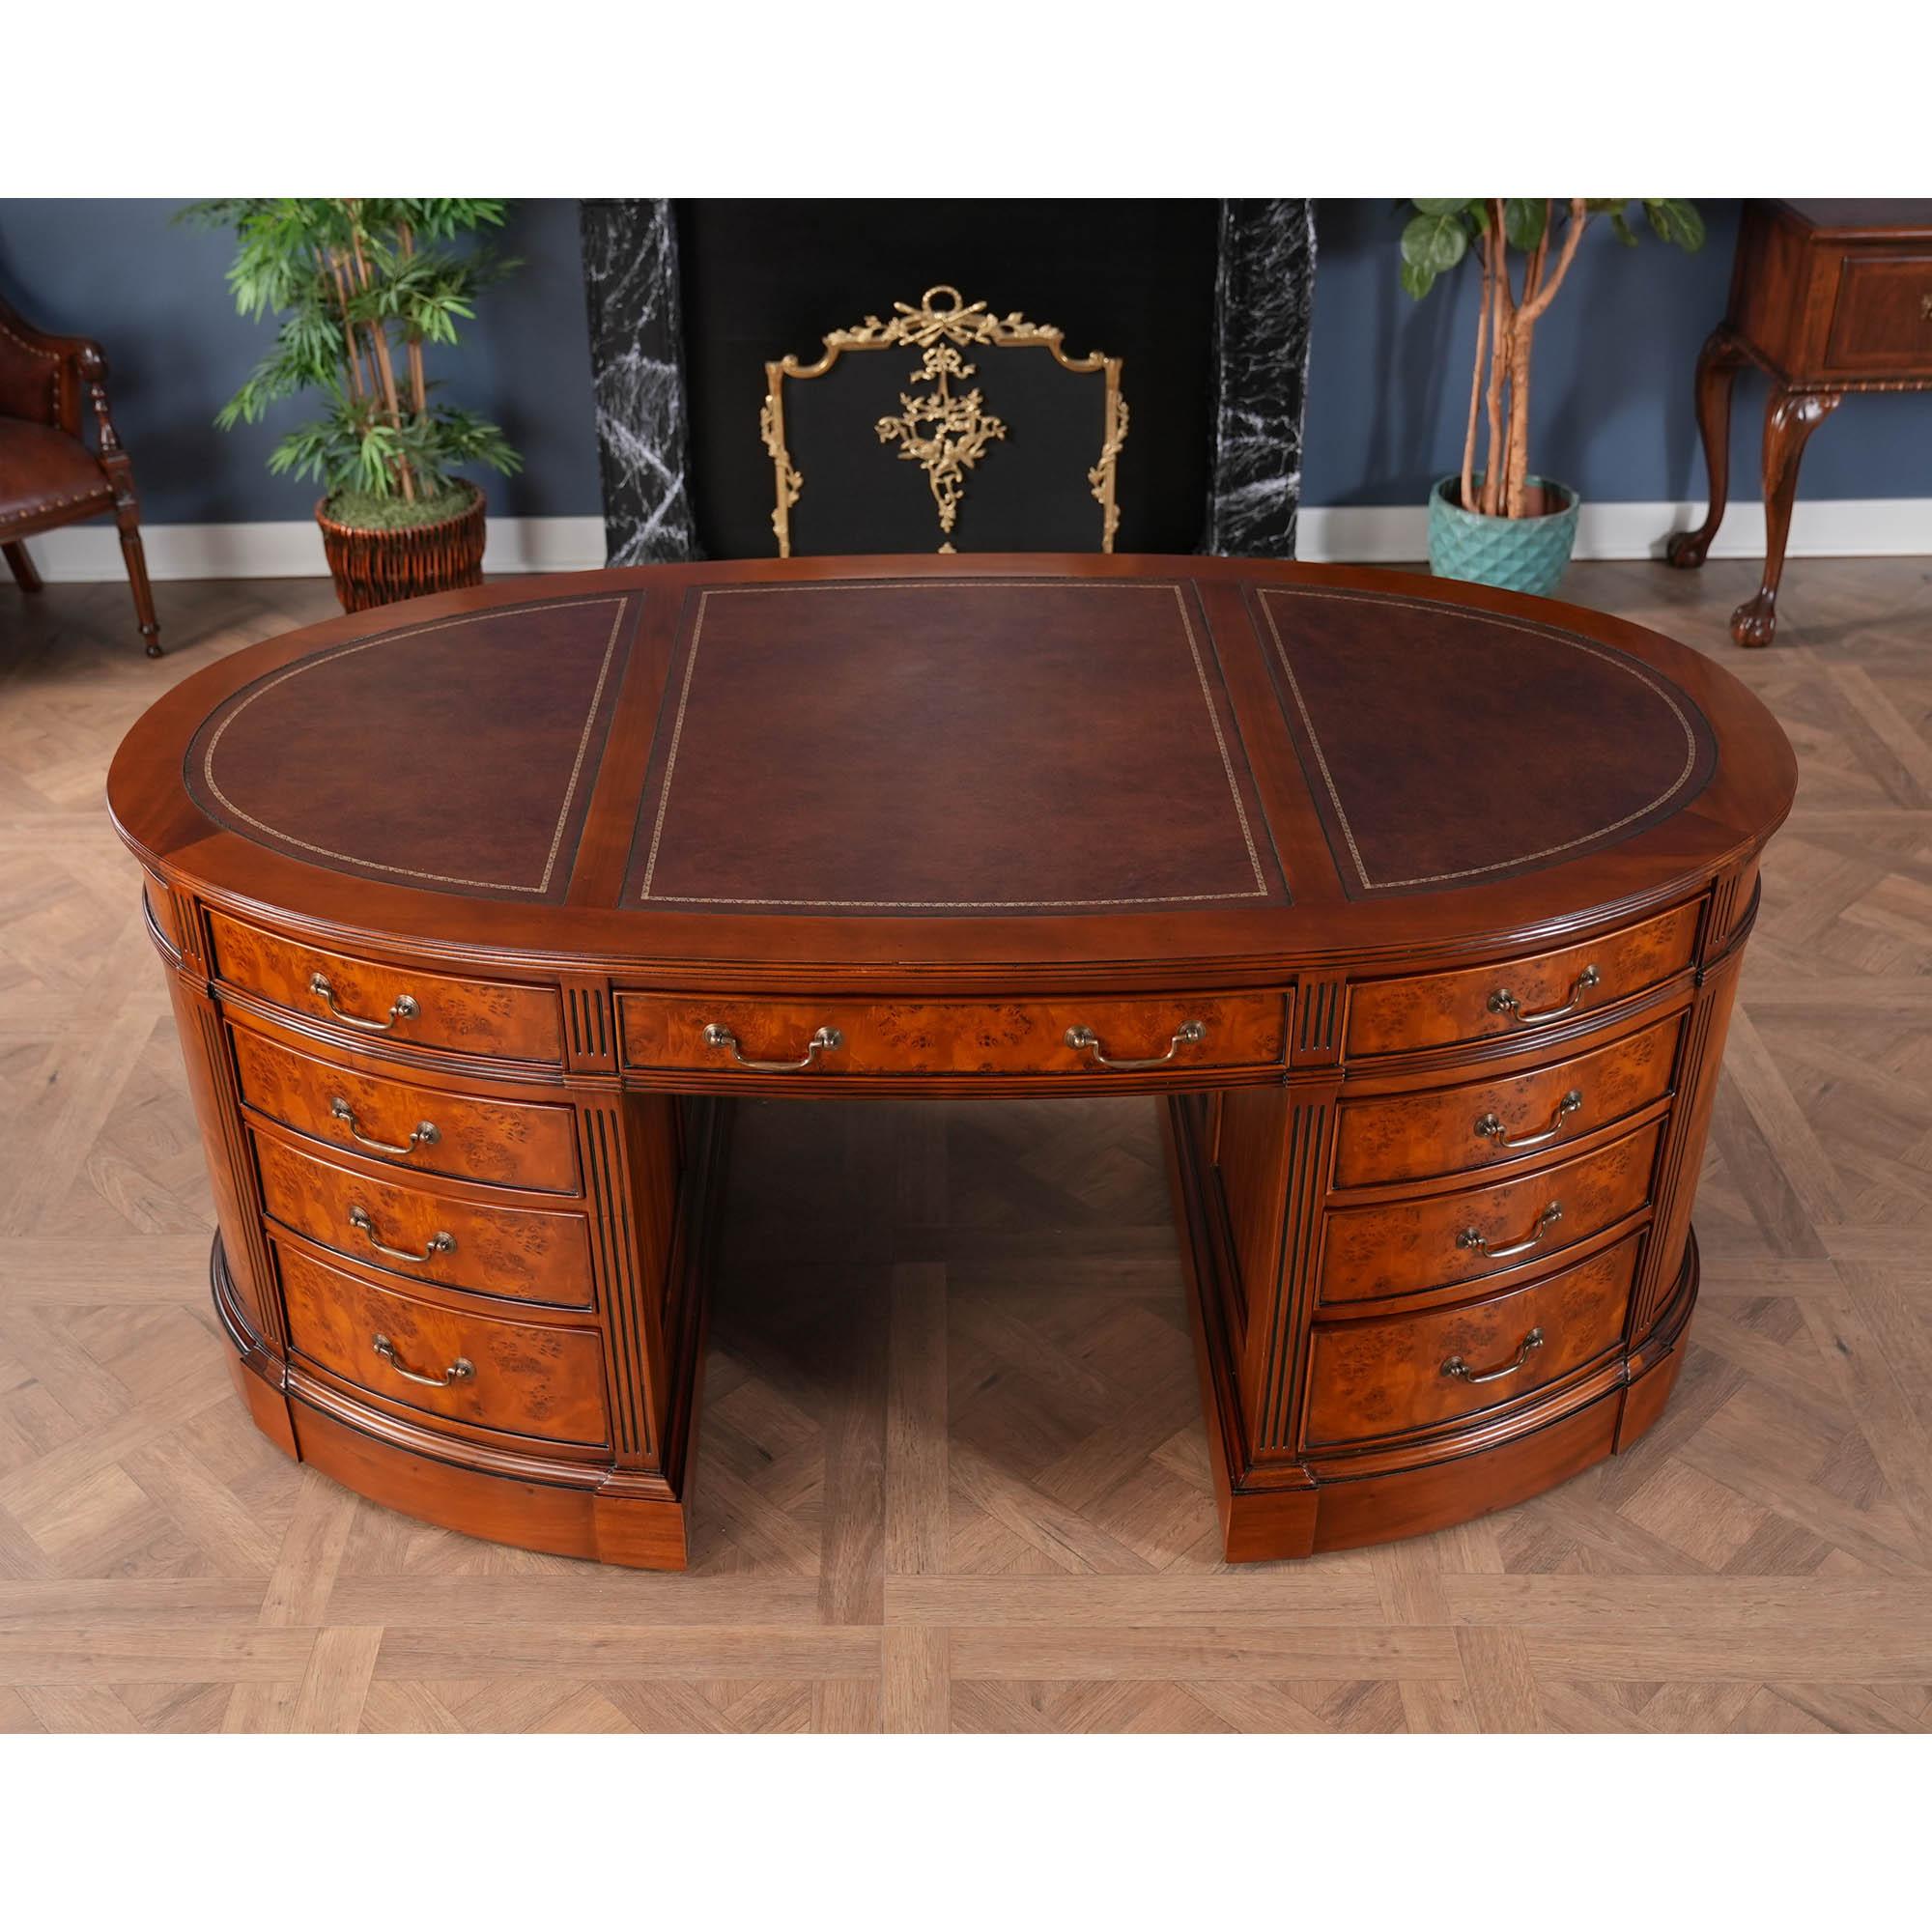 One of the most complicated items that we produce at Niagara furniture our Burled Oval Partners Desk is also one of the most popular. The top section of the desk consists of a three-paneled writing surfaces of brown full grain genuine leather which